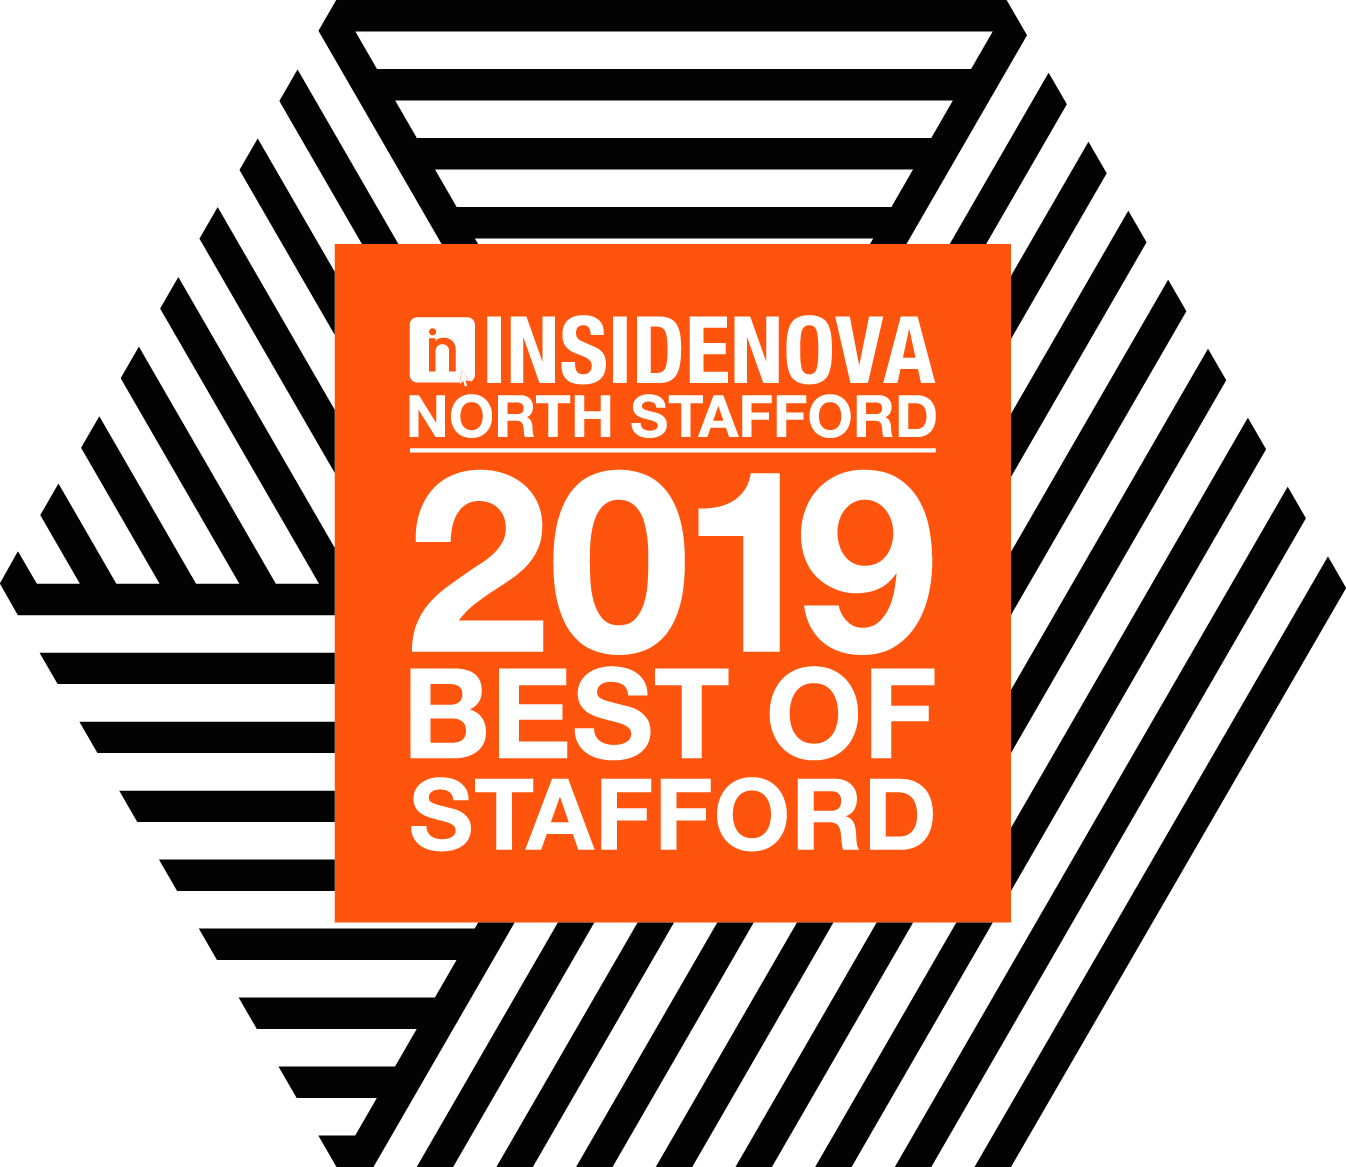 2019 Best of Stafford award for best moving company